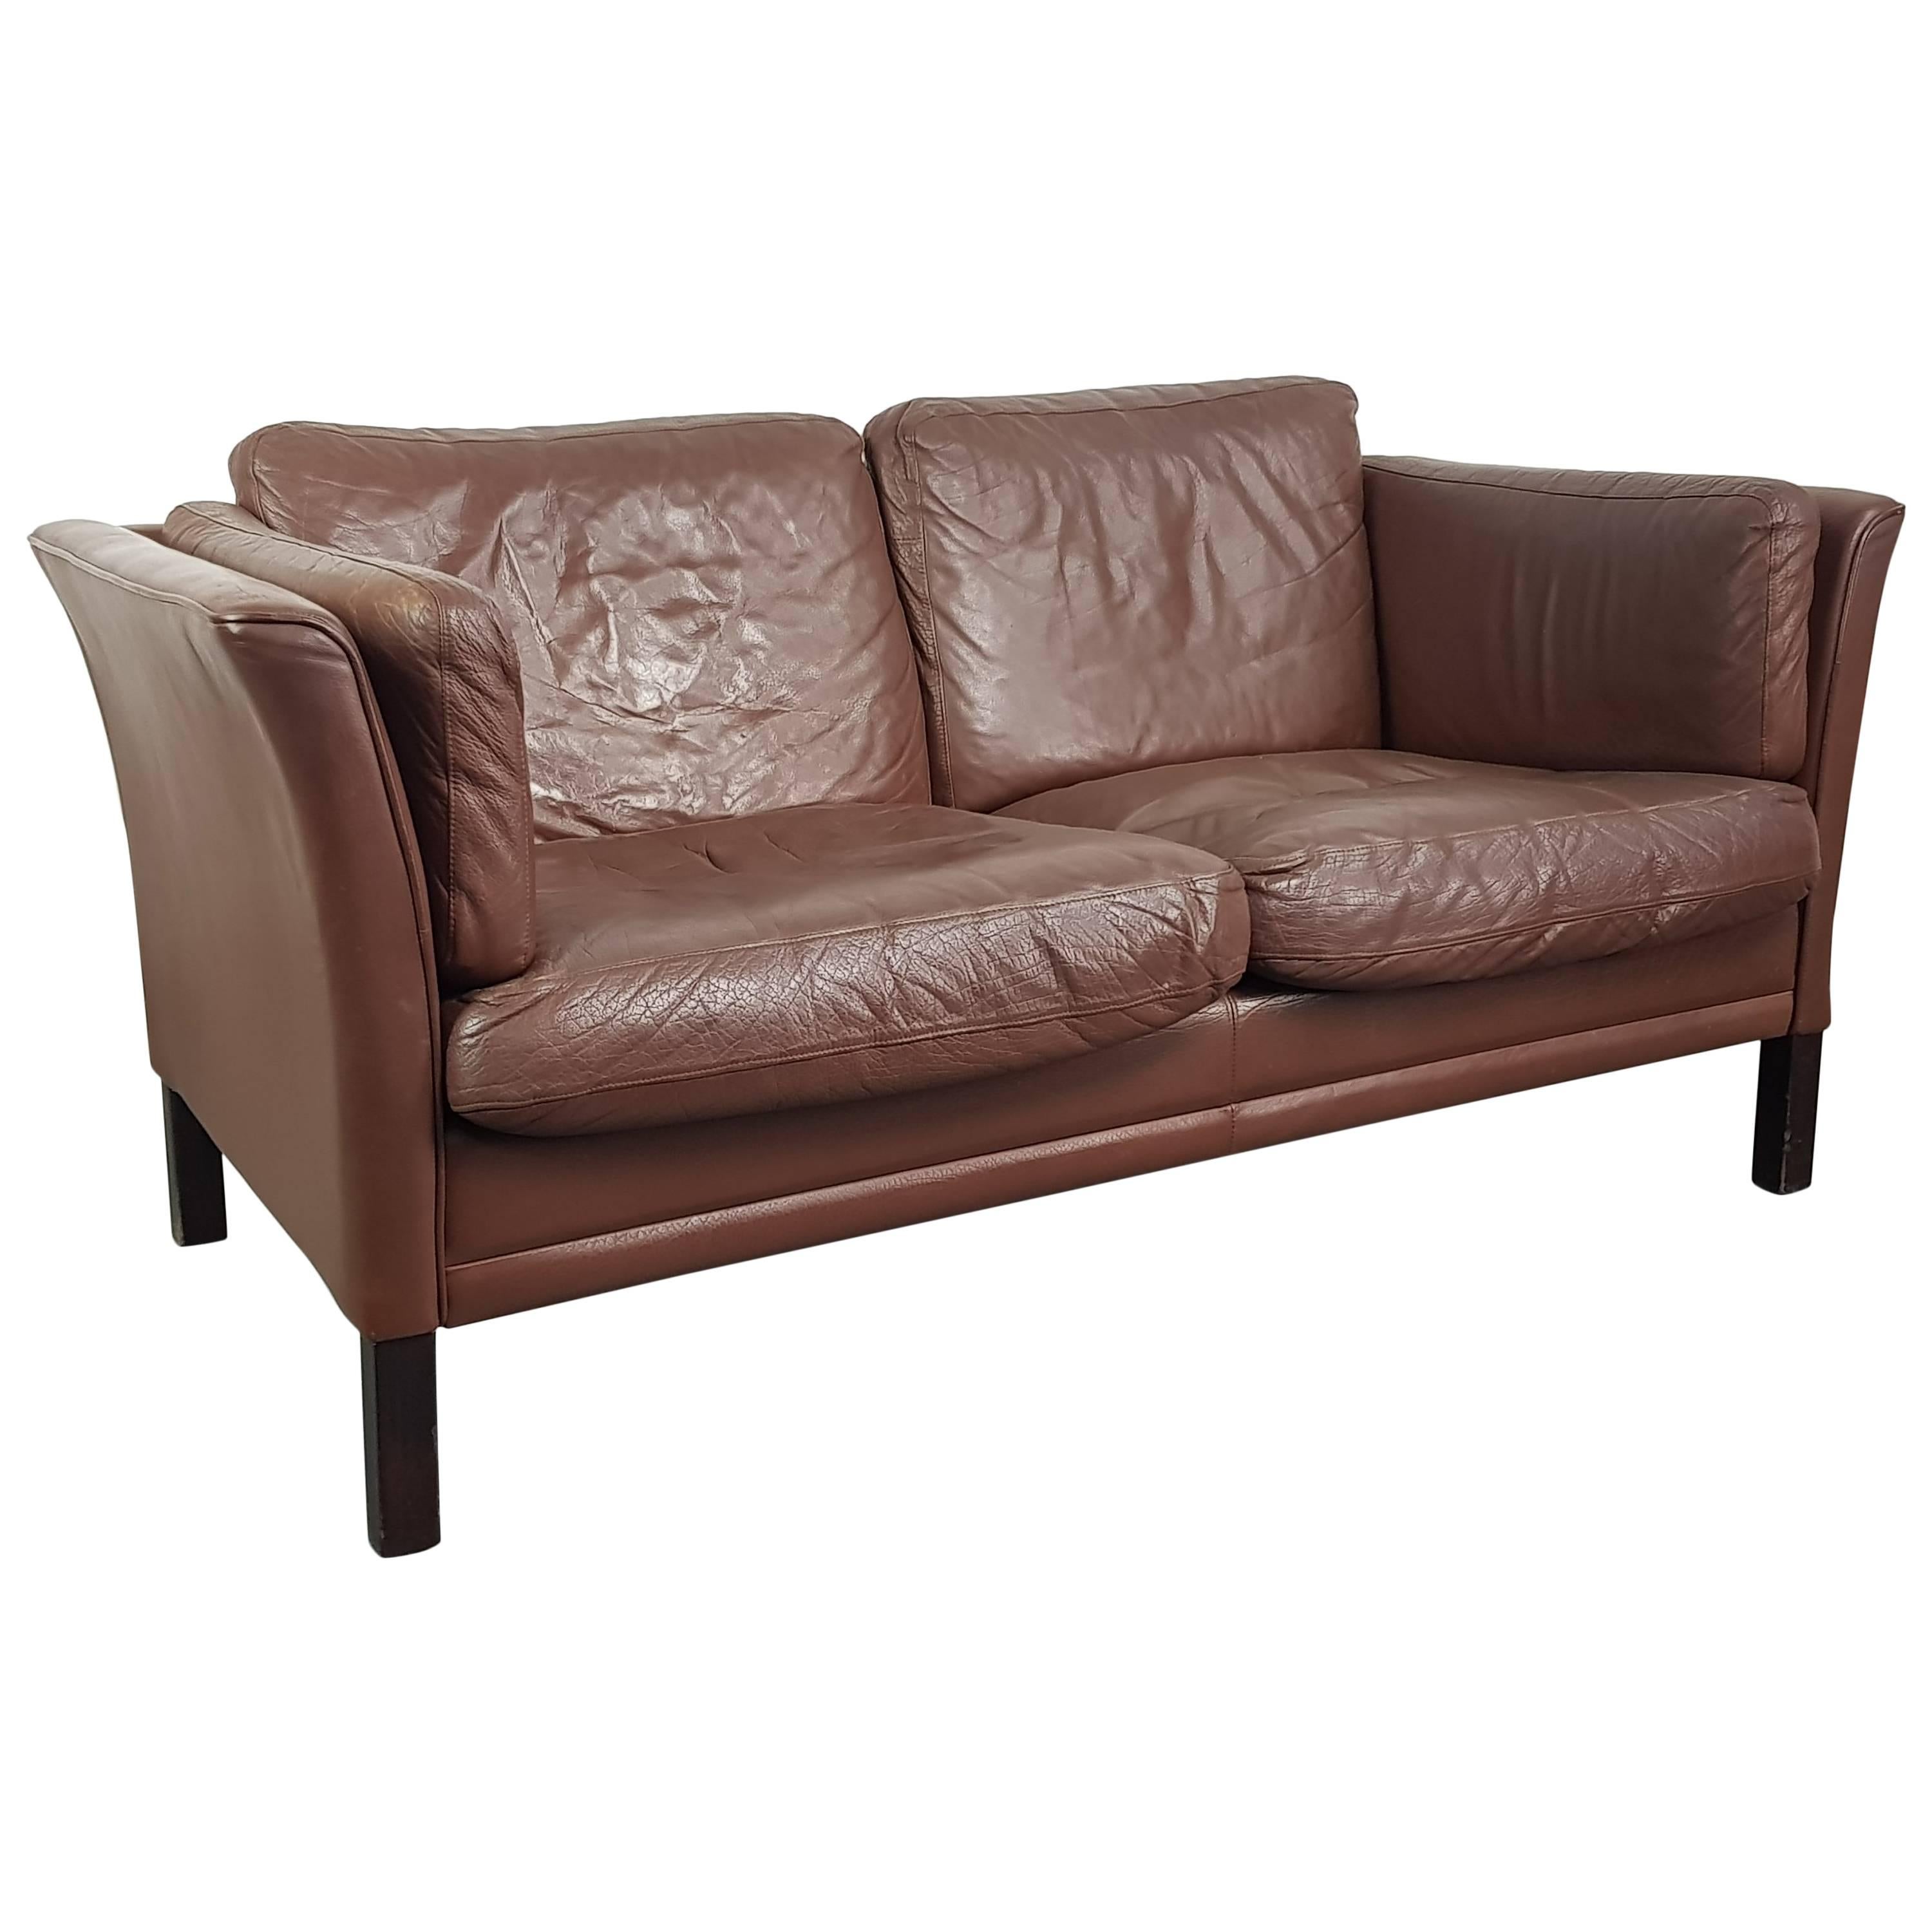 1970s Chestnut Brown Leather Mogensen Style Two-Seat Sofa For Sale